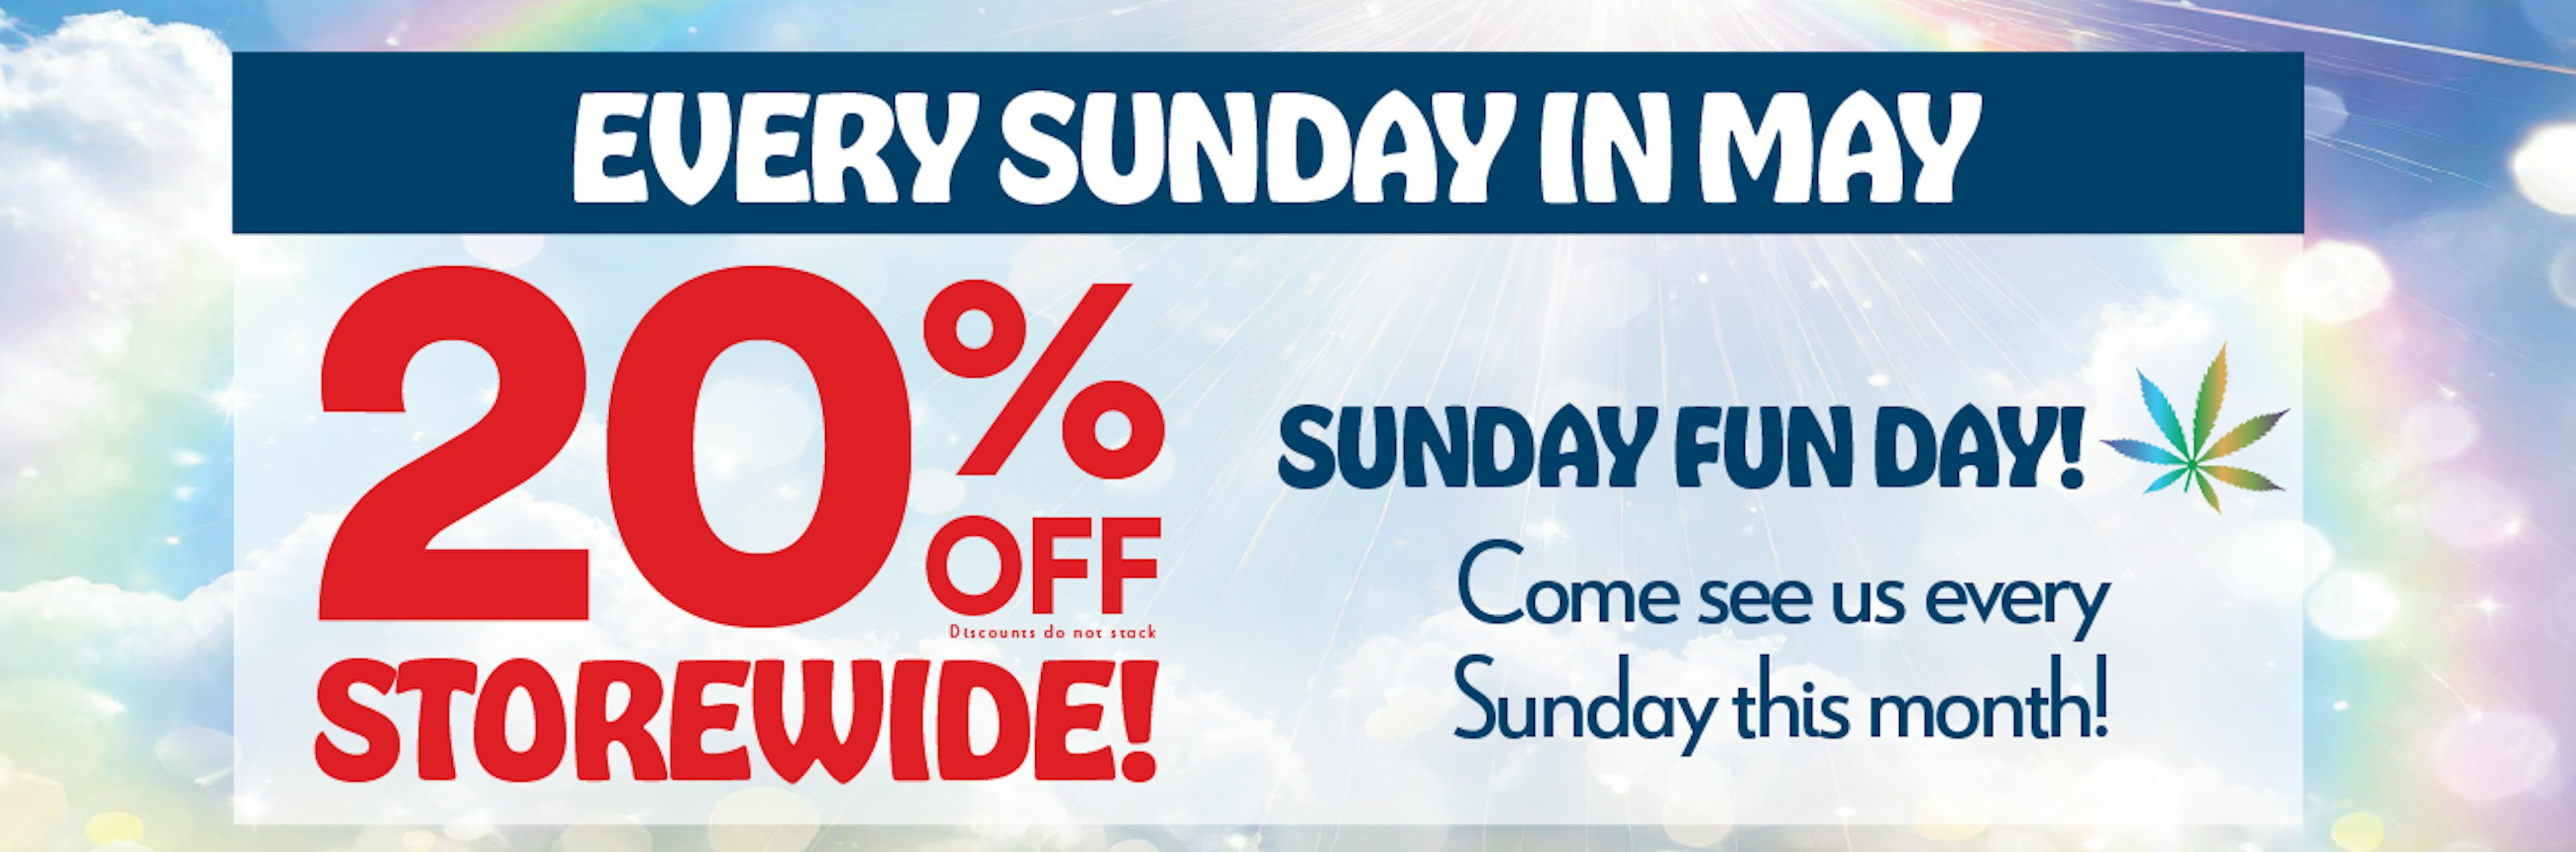 Every Sunday in May, take 20% off storewide!